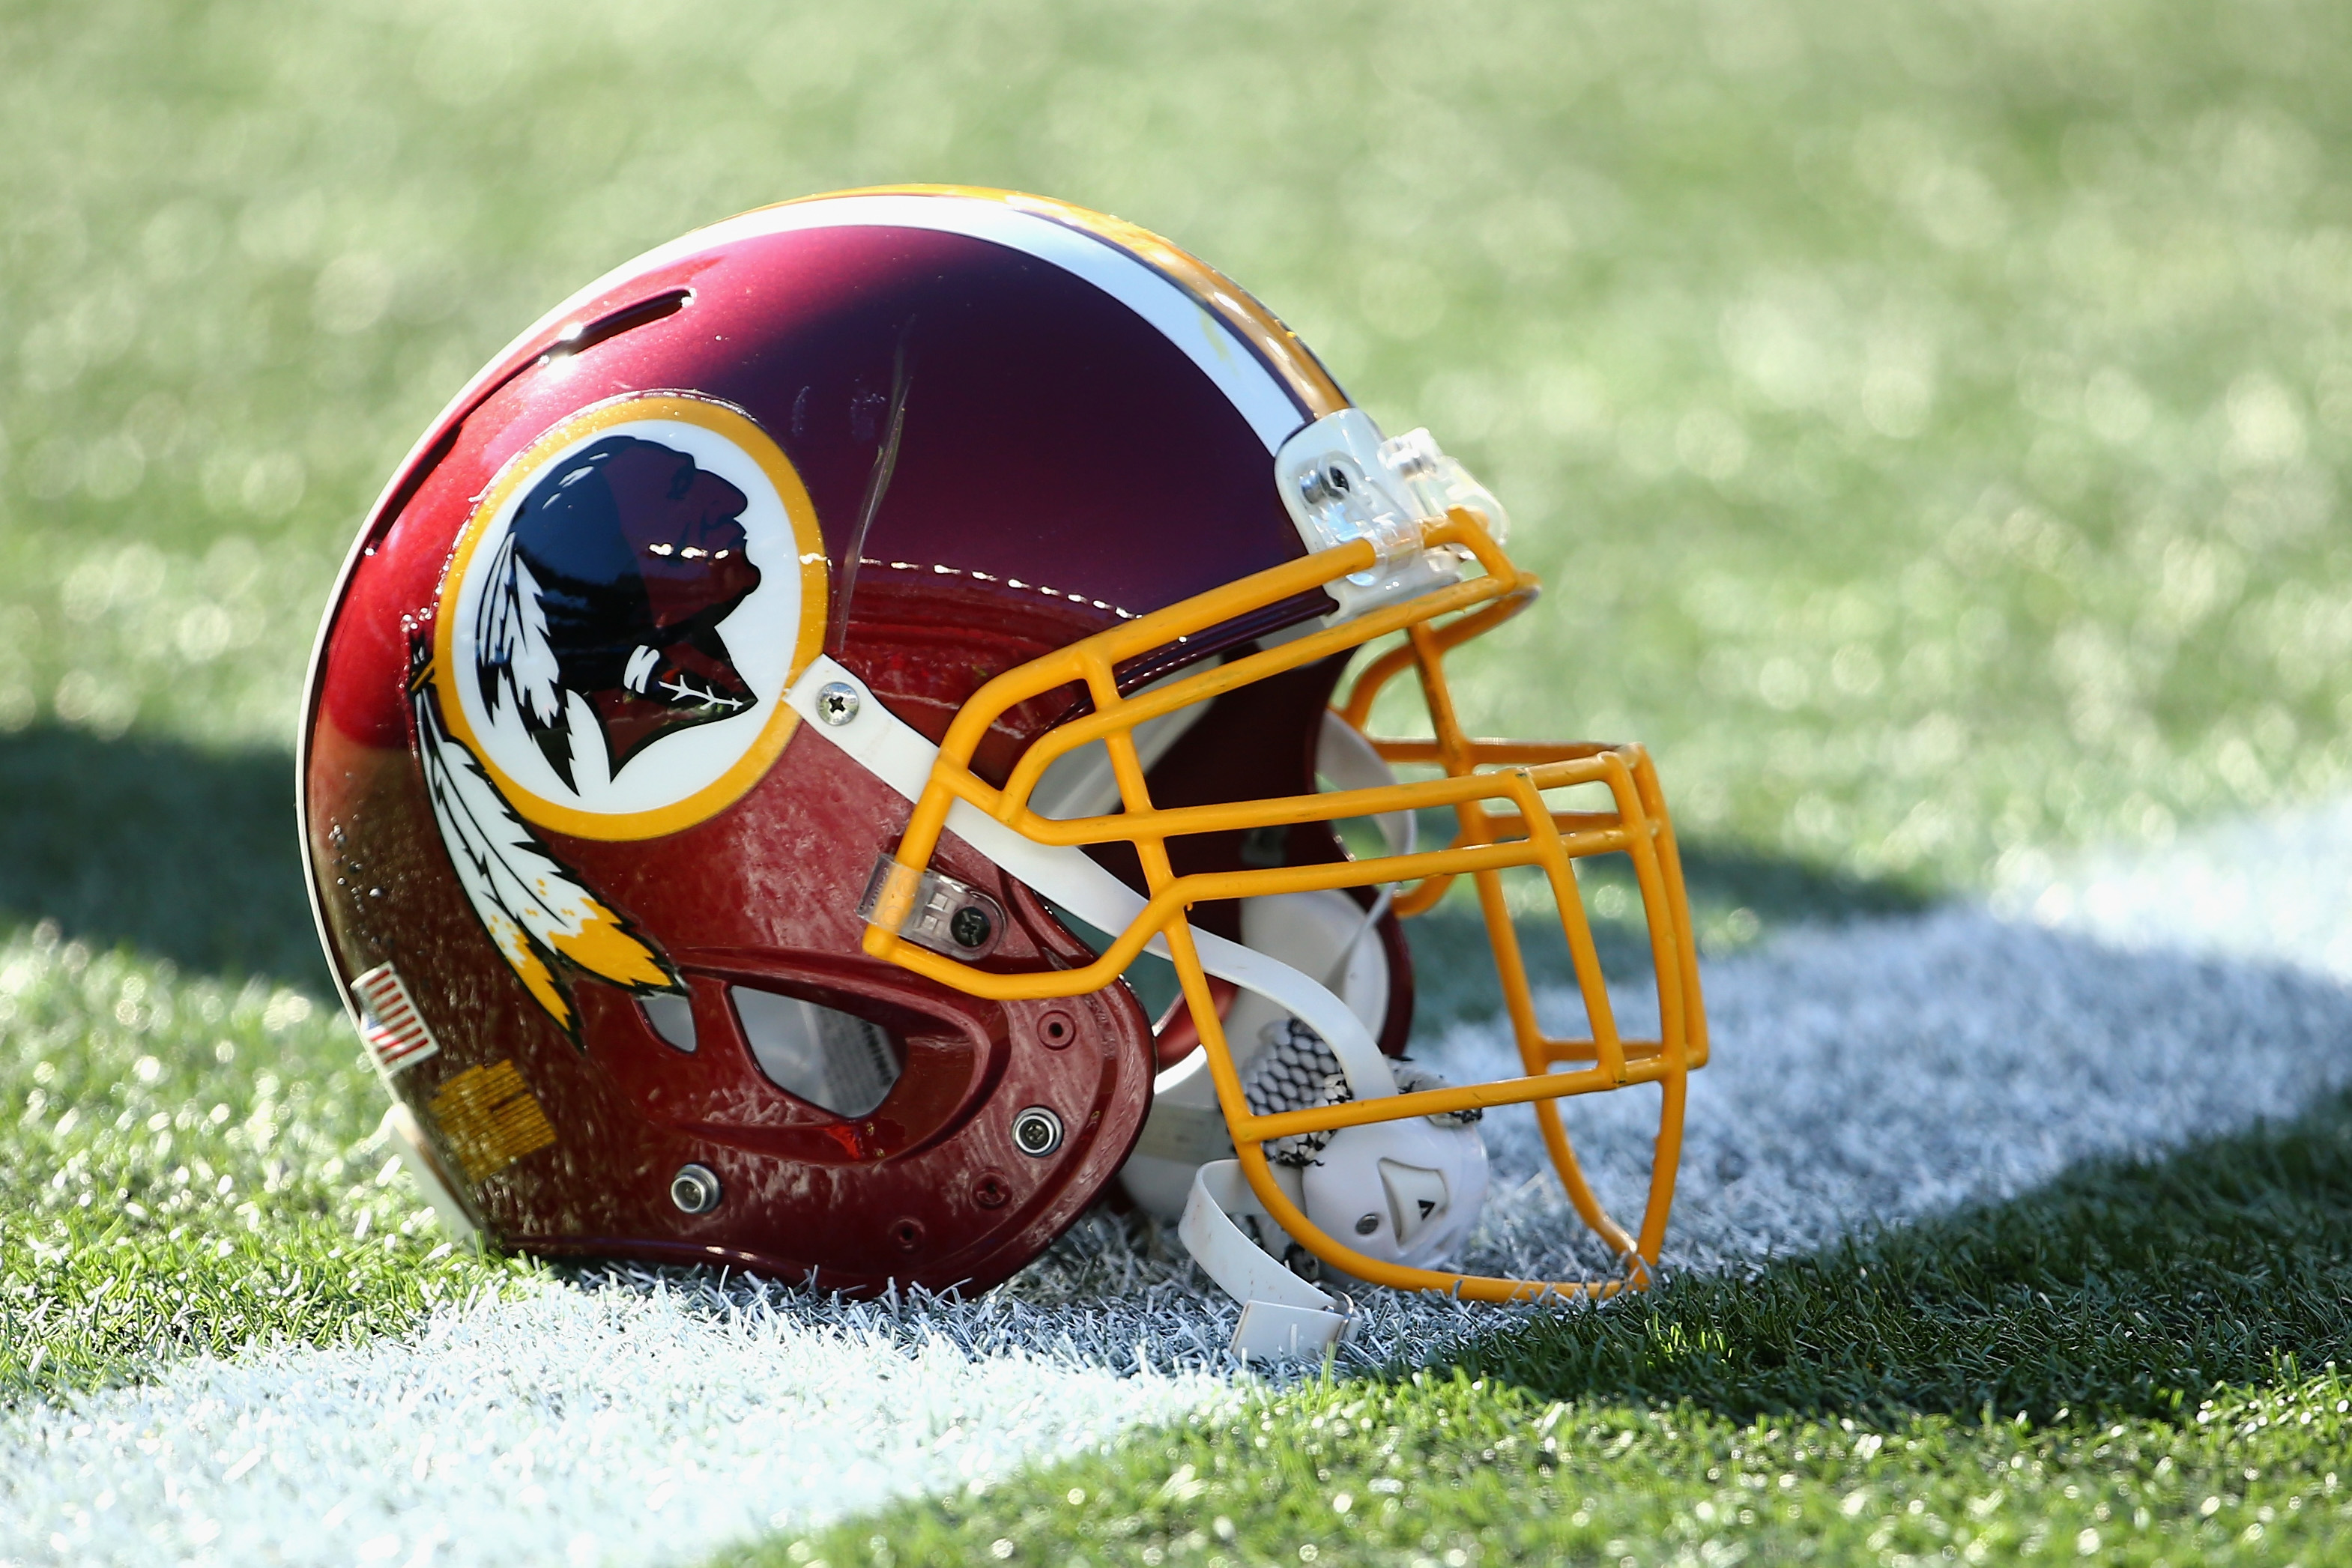 Redskins: The NFL Must Stop Promoting a Racial Slur